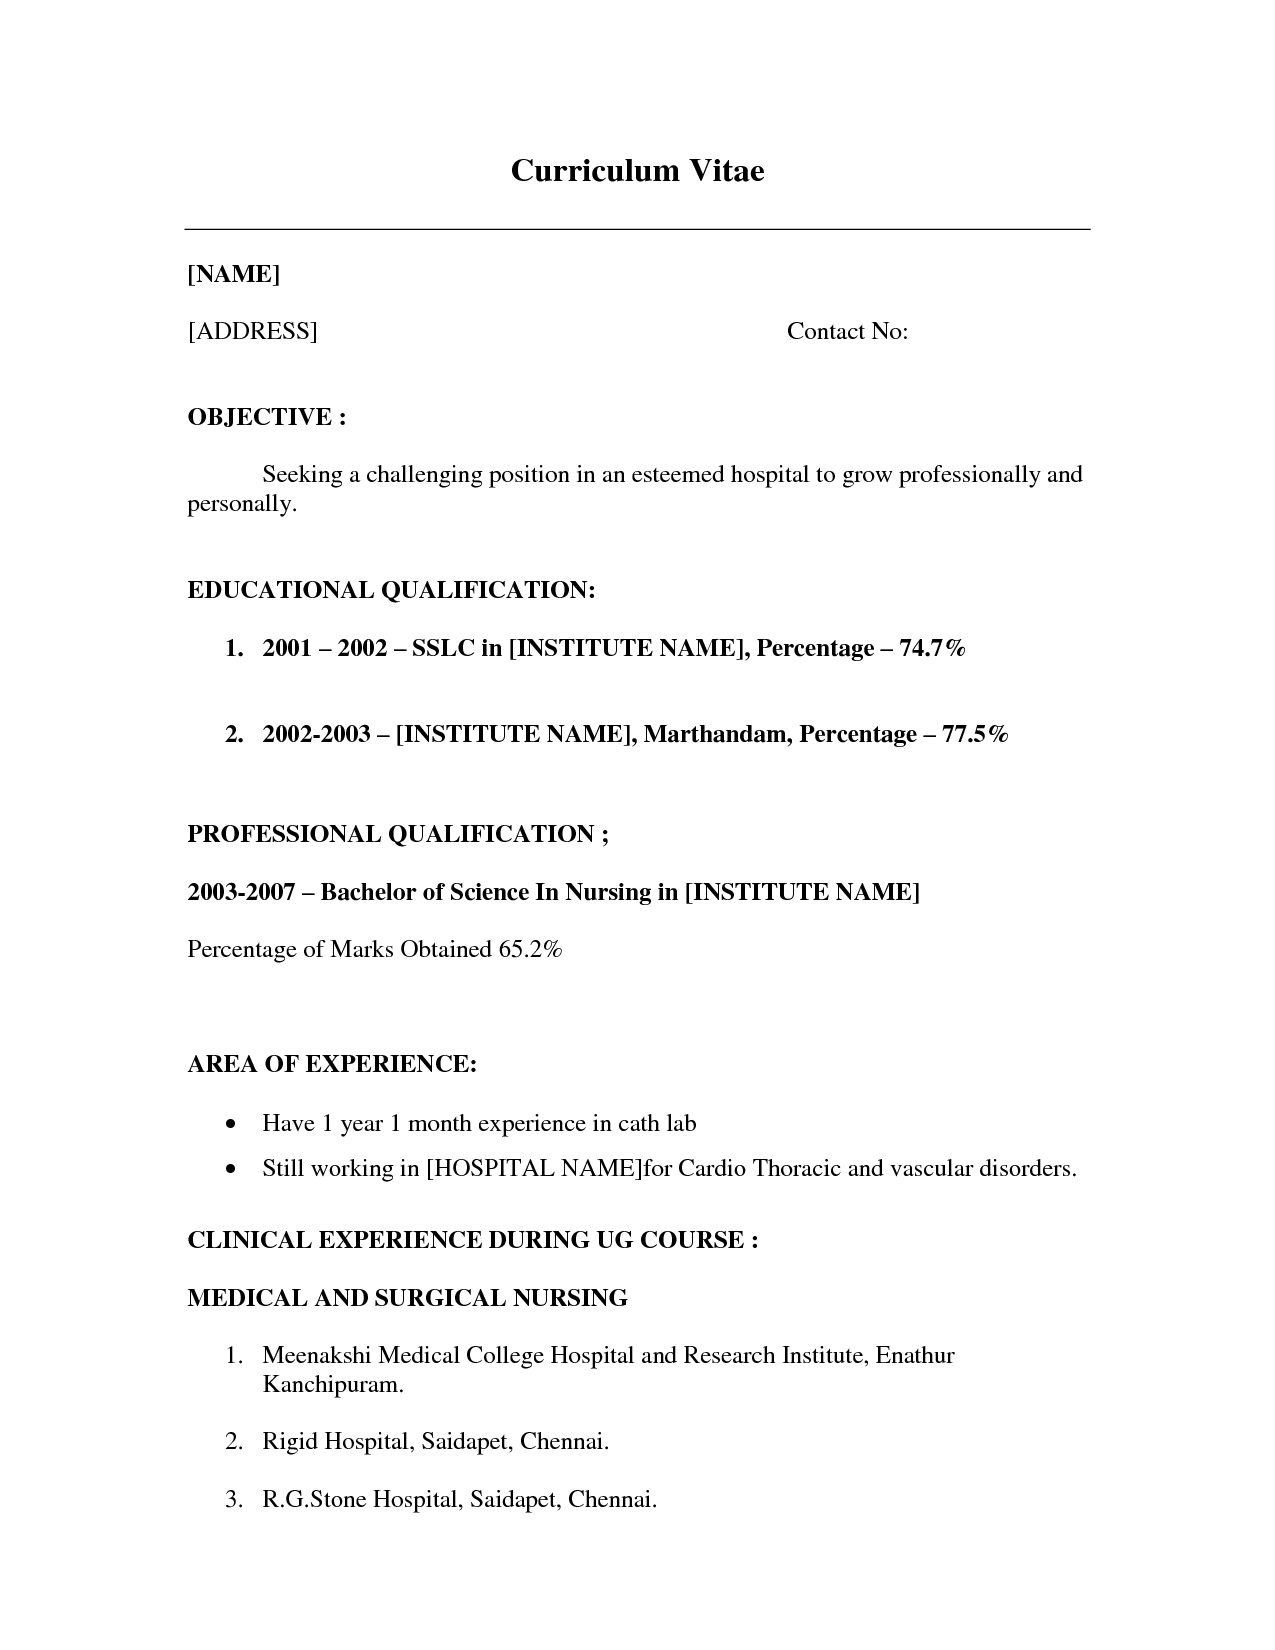 Free Resume Templates with No Work Experience Free Resume Templates No Work Experience – Resume Examples Job …